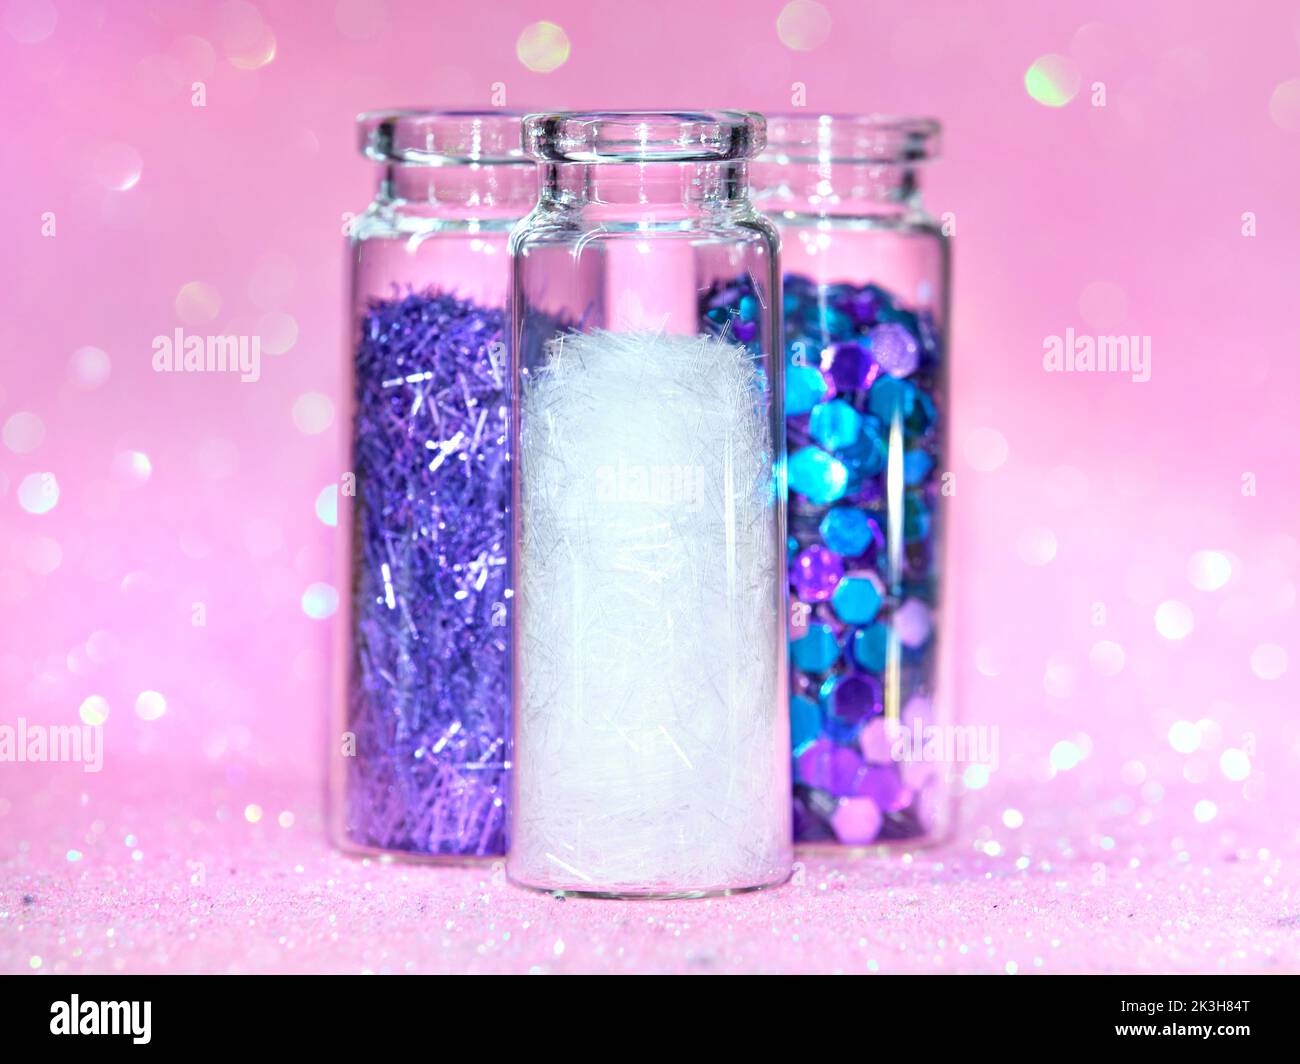 All kinds of glitter products on pink sparkling background. Close-up on vials, bottles with various glitter makeup in neon pink, blue and turquoise. Stock Photo